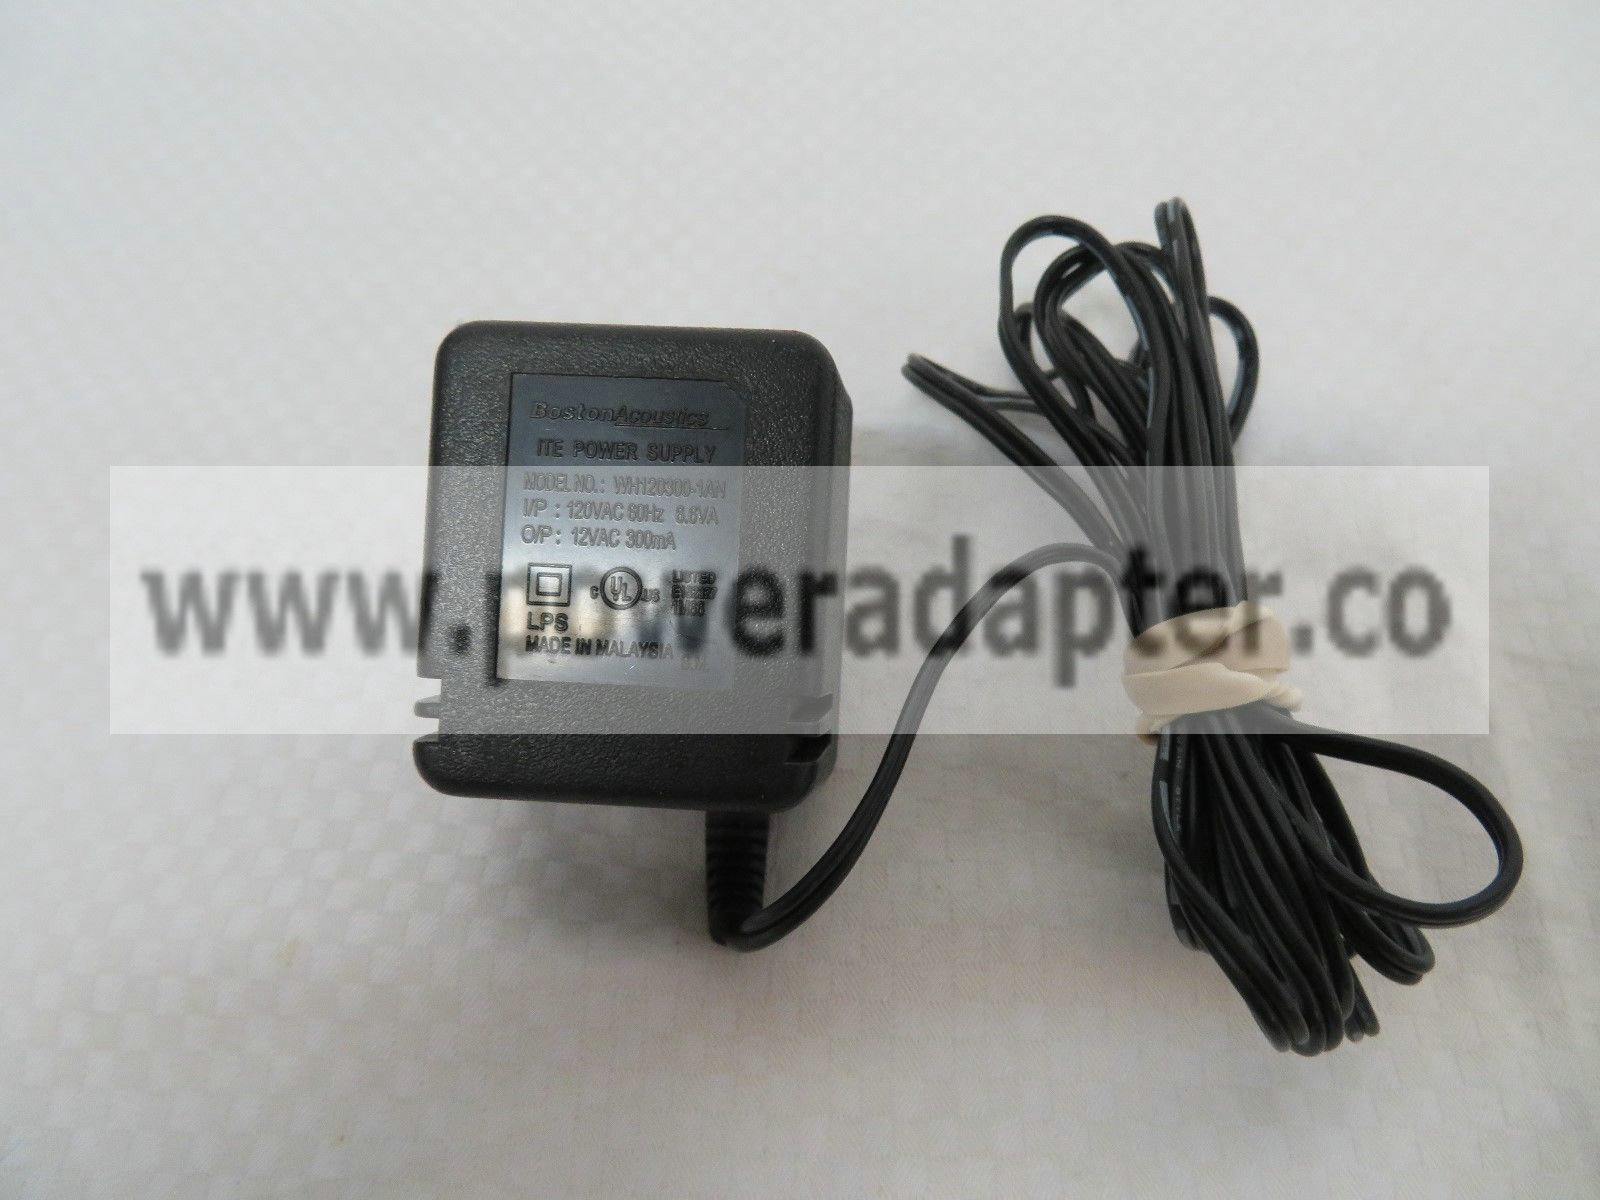 Boston Acoustics WH120300-1AN AC Power Supply Charger Adapter Brand: Boston Acoustics Model no: WH120300-1AN MPN